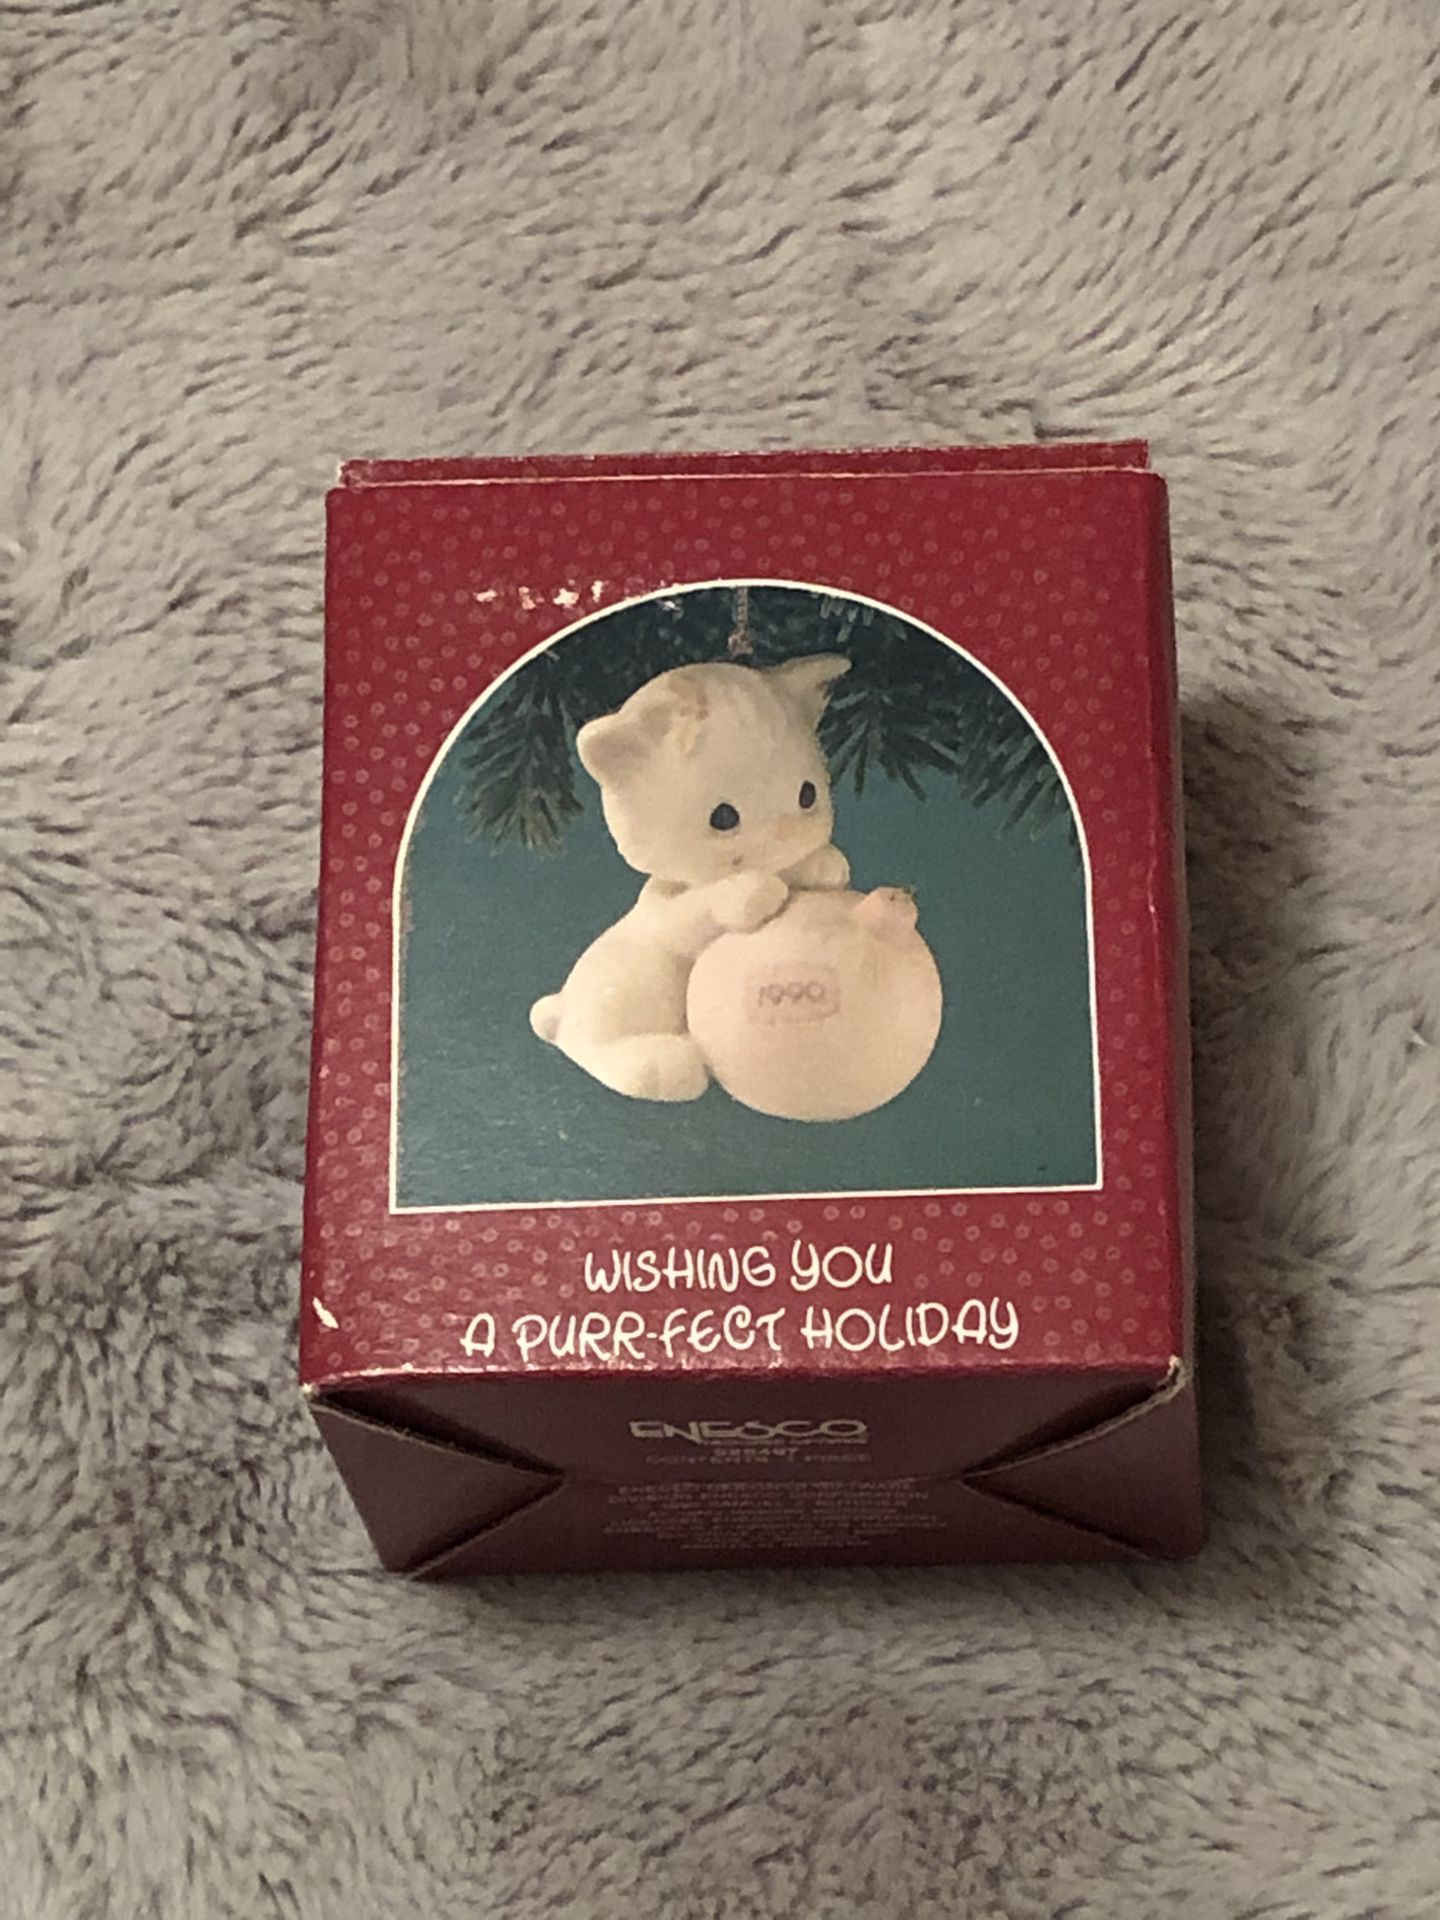 1990 Precious Moments Collection Miniature Ornament “ Wishing You A Purr-Fect Holiday”